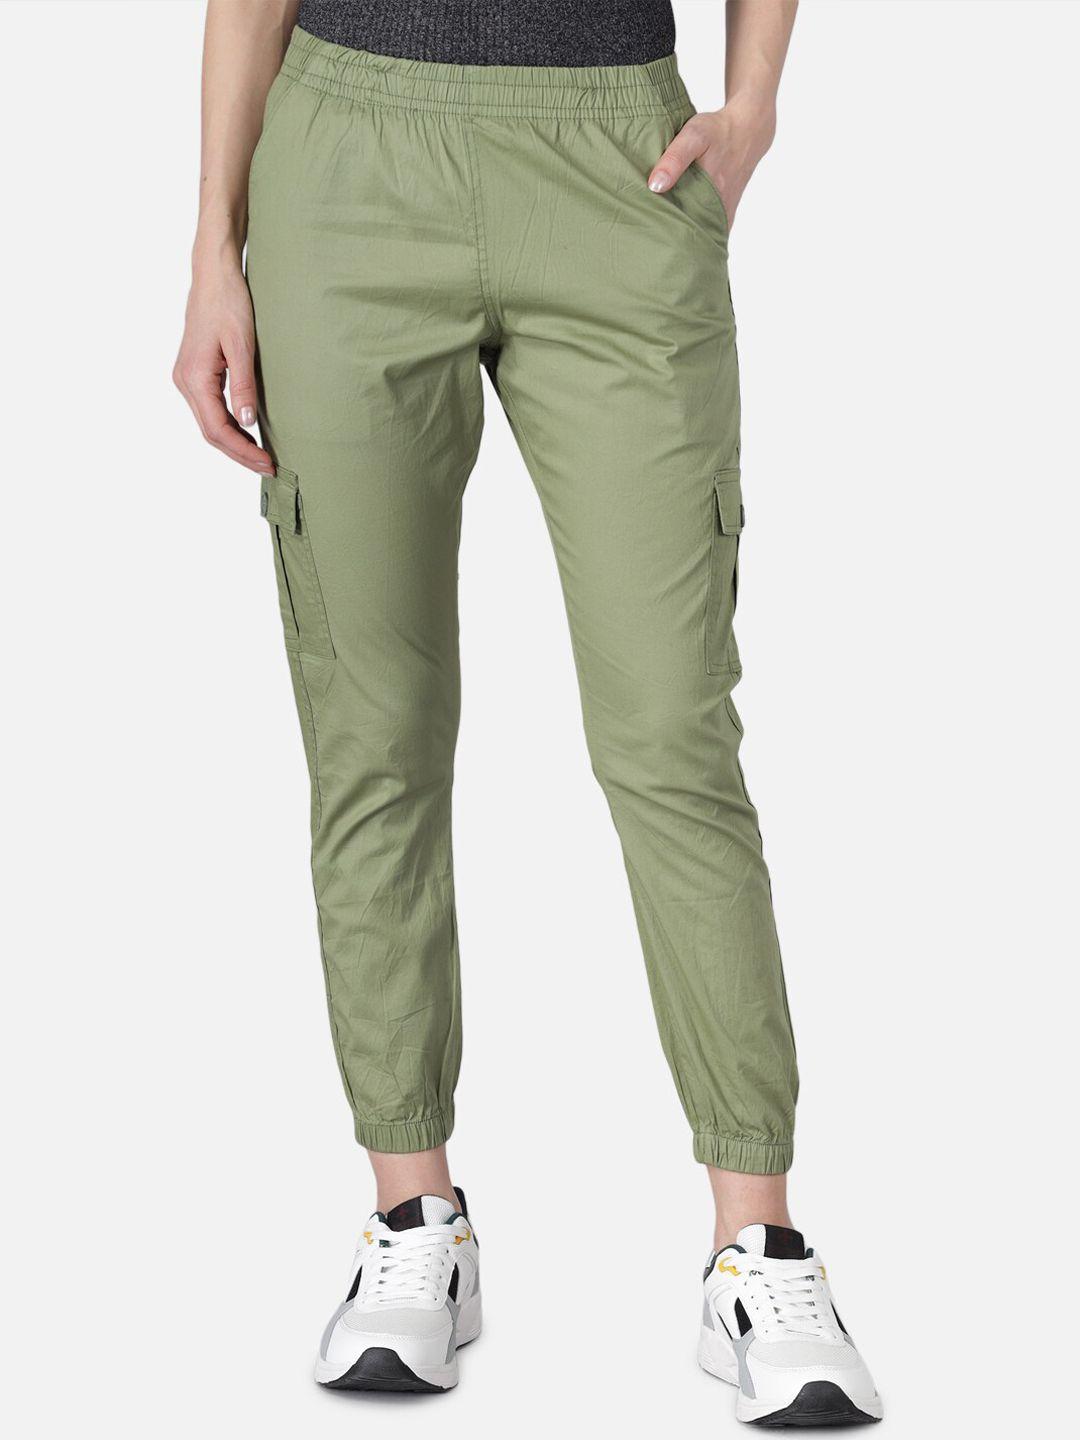 the dry state women olive green regular fit solid cargos joggers